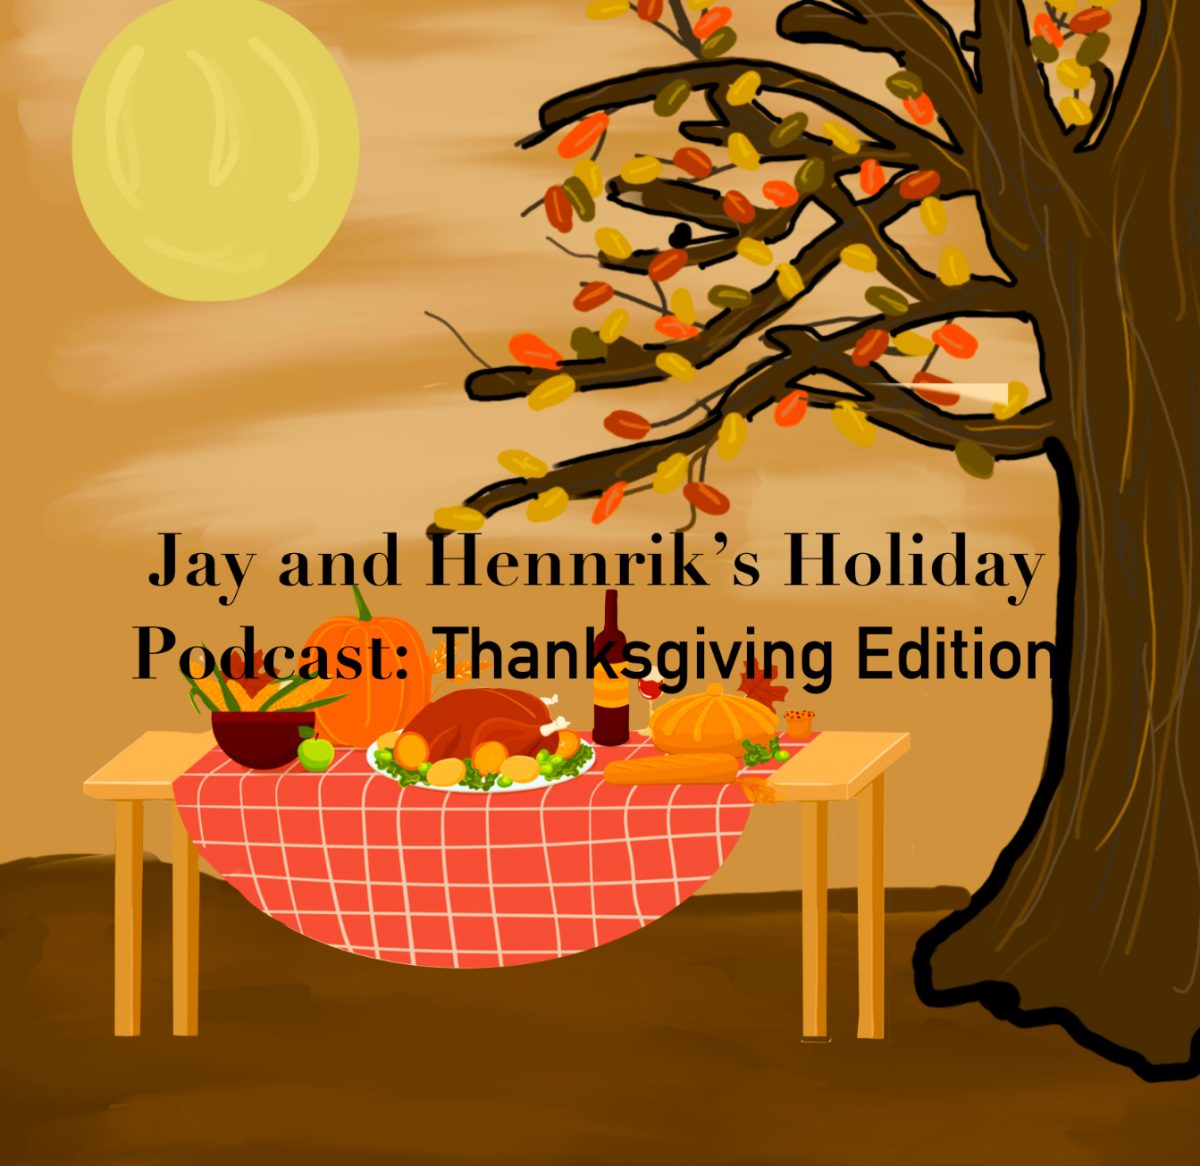 Jay+and+Henriks+Holiday+Podcast%3A+Thanksgiving+Edition